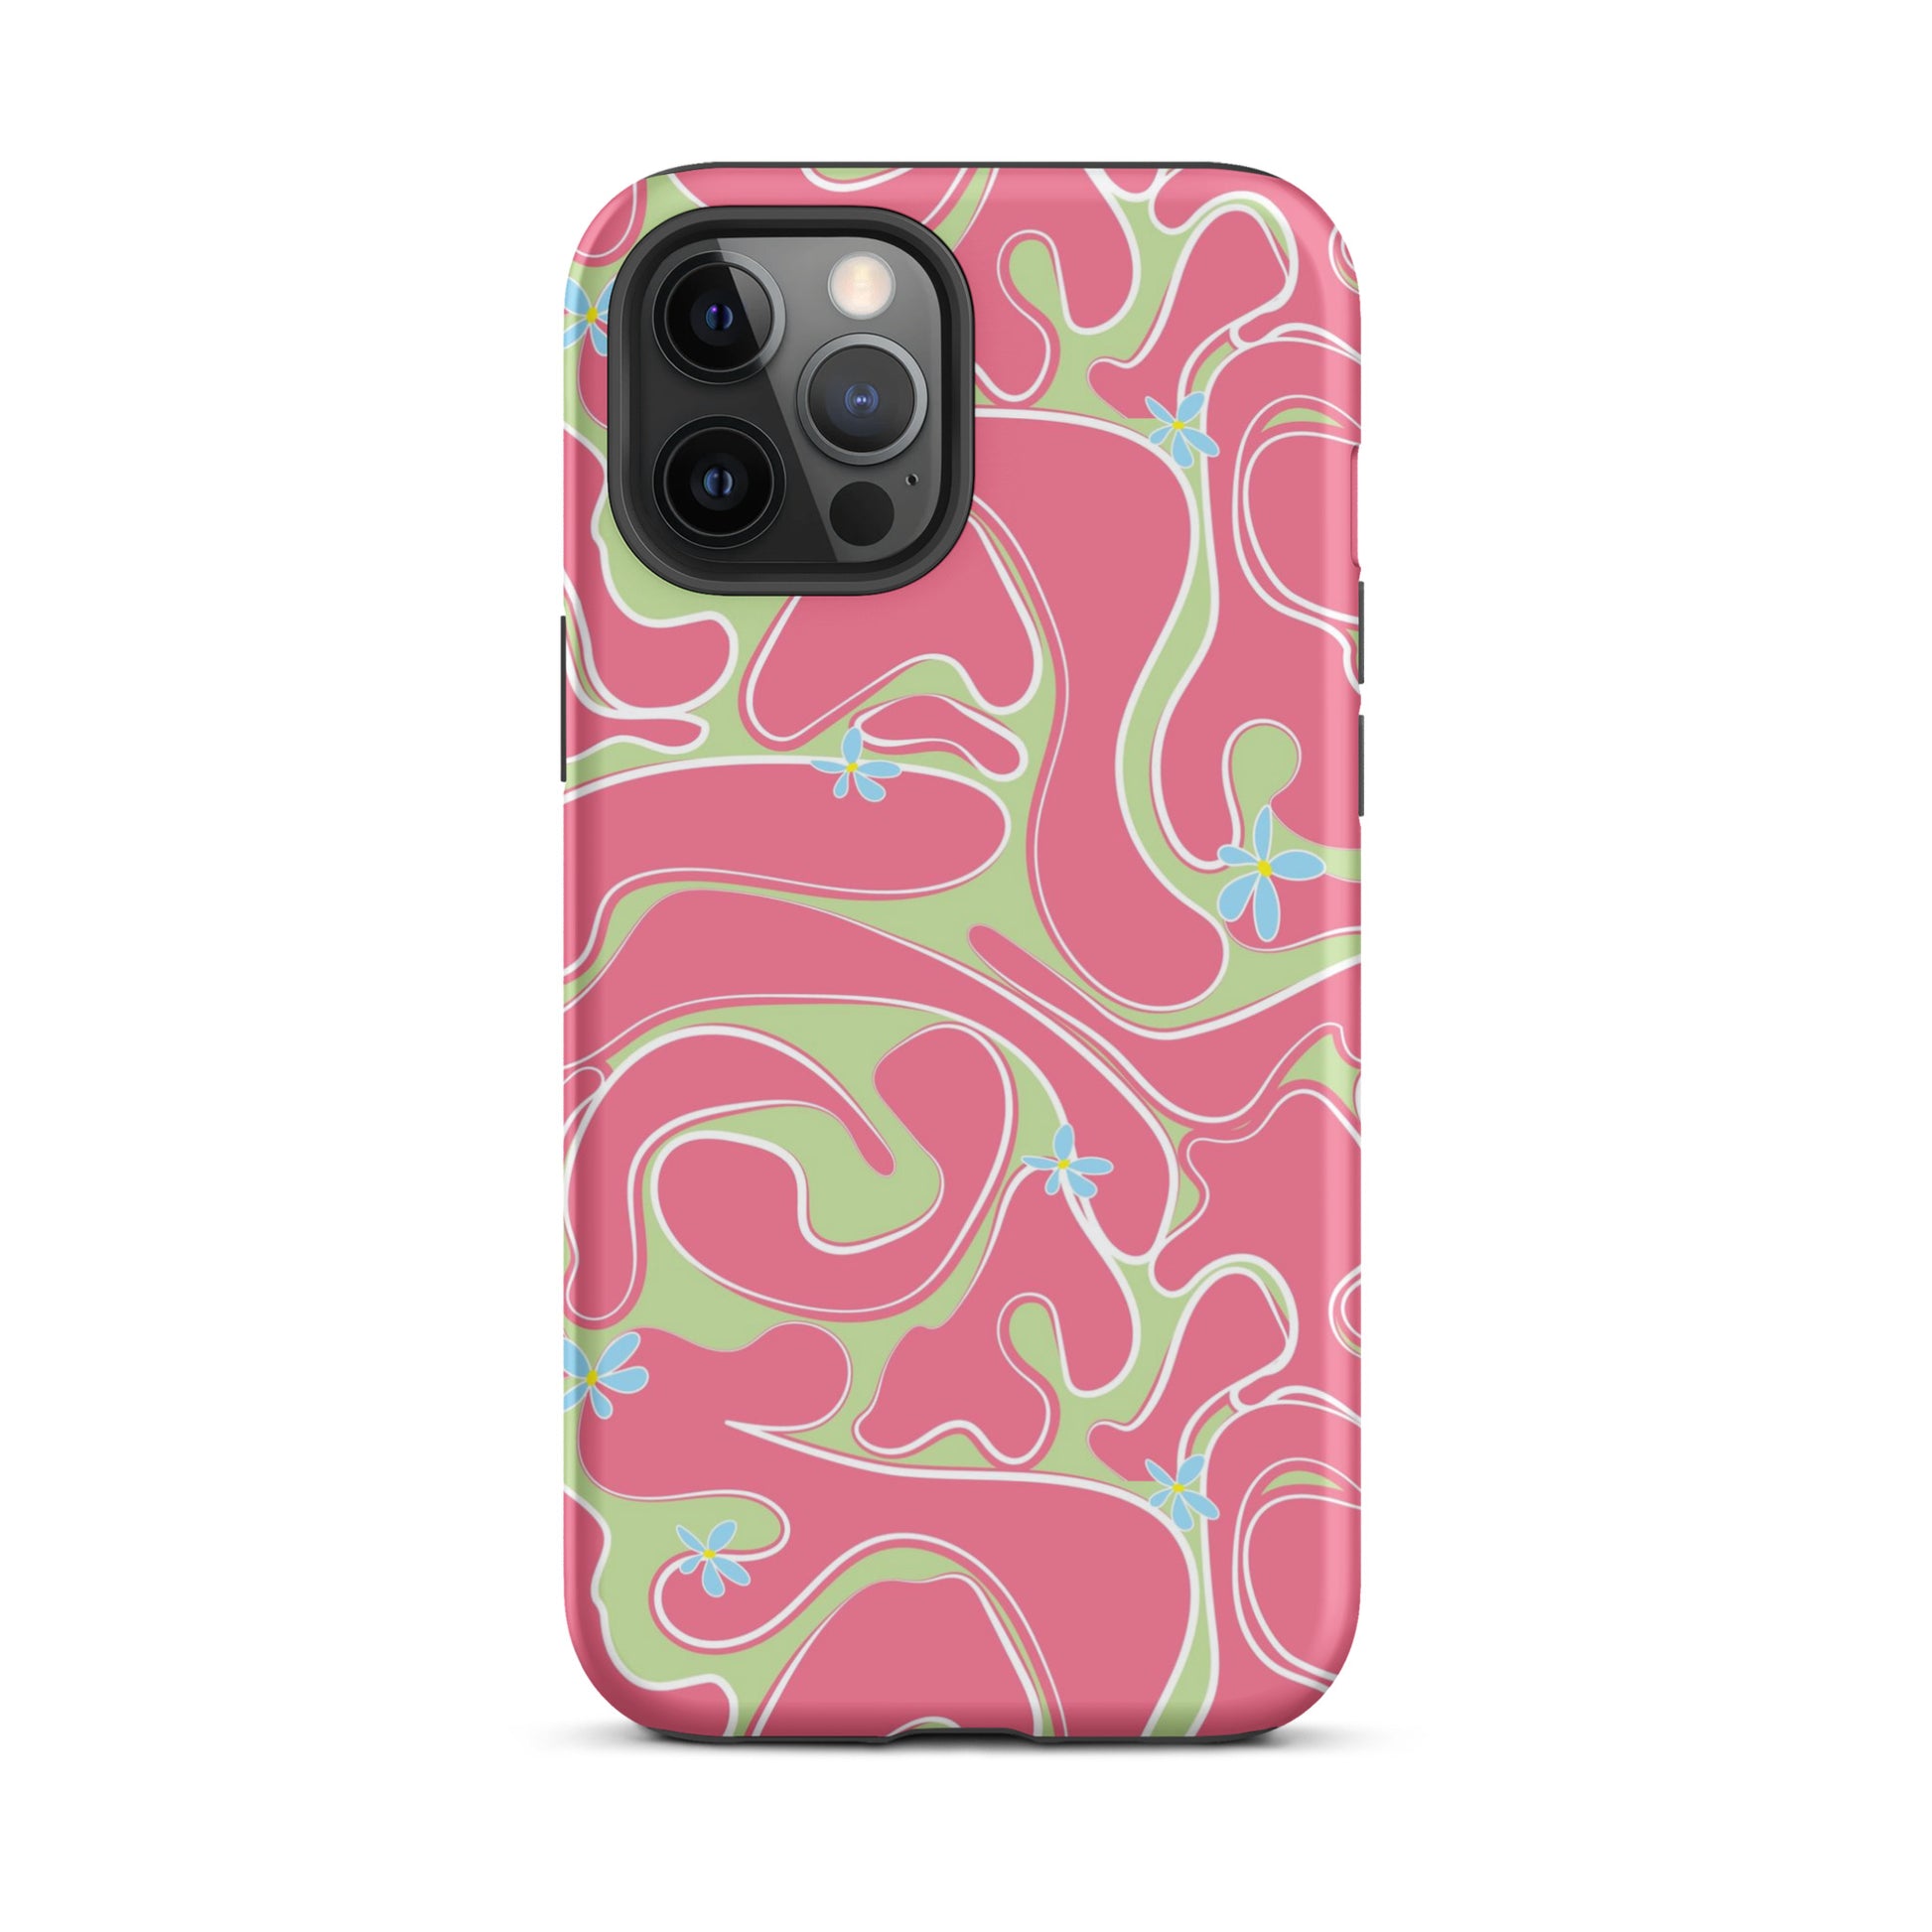 Reef Waves iPhone Case Matte iPhone 12 Pro Max